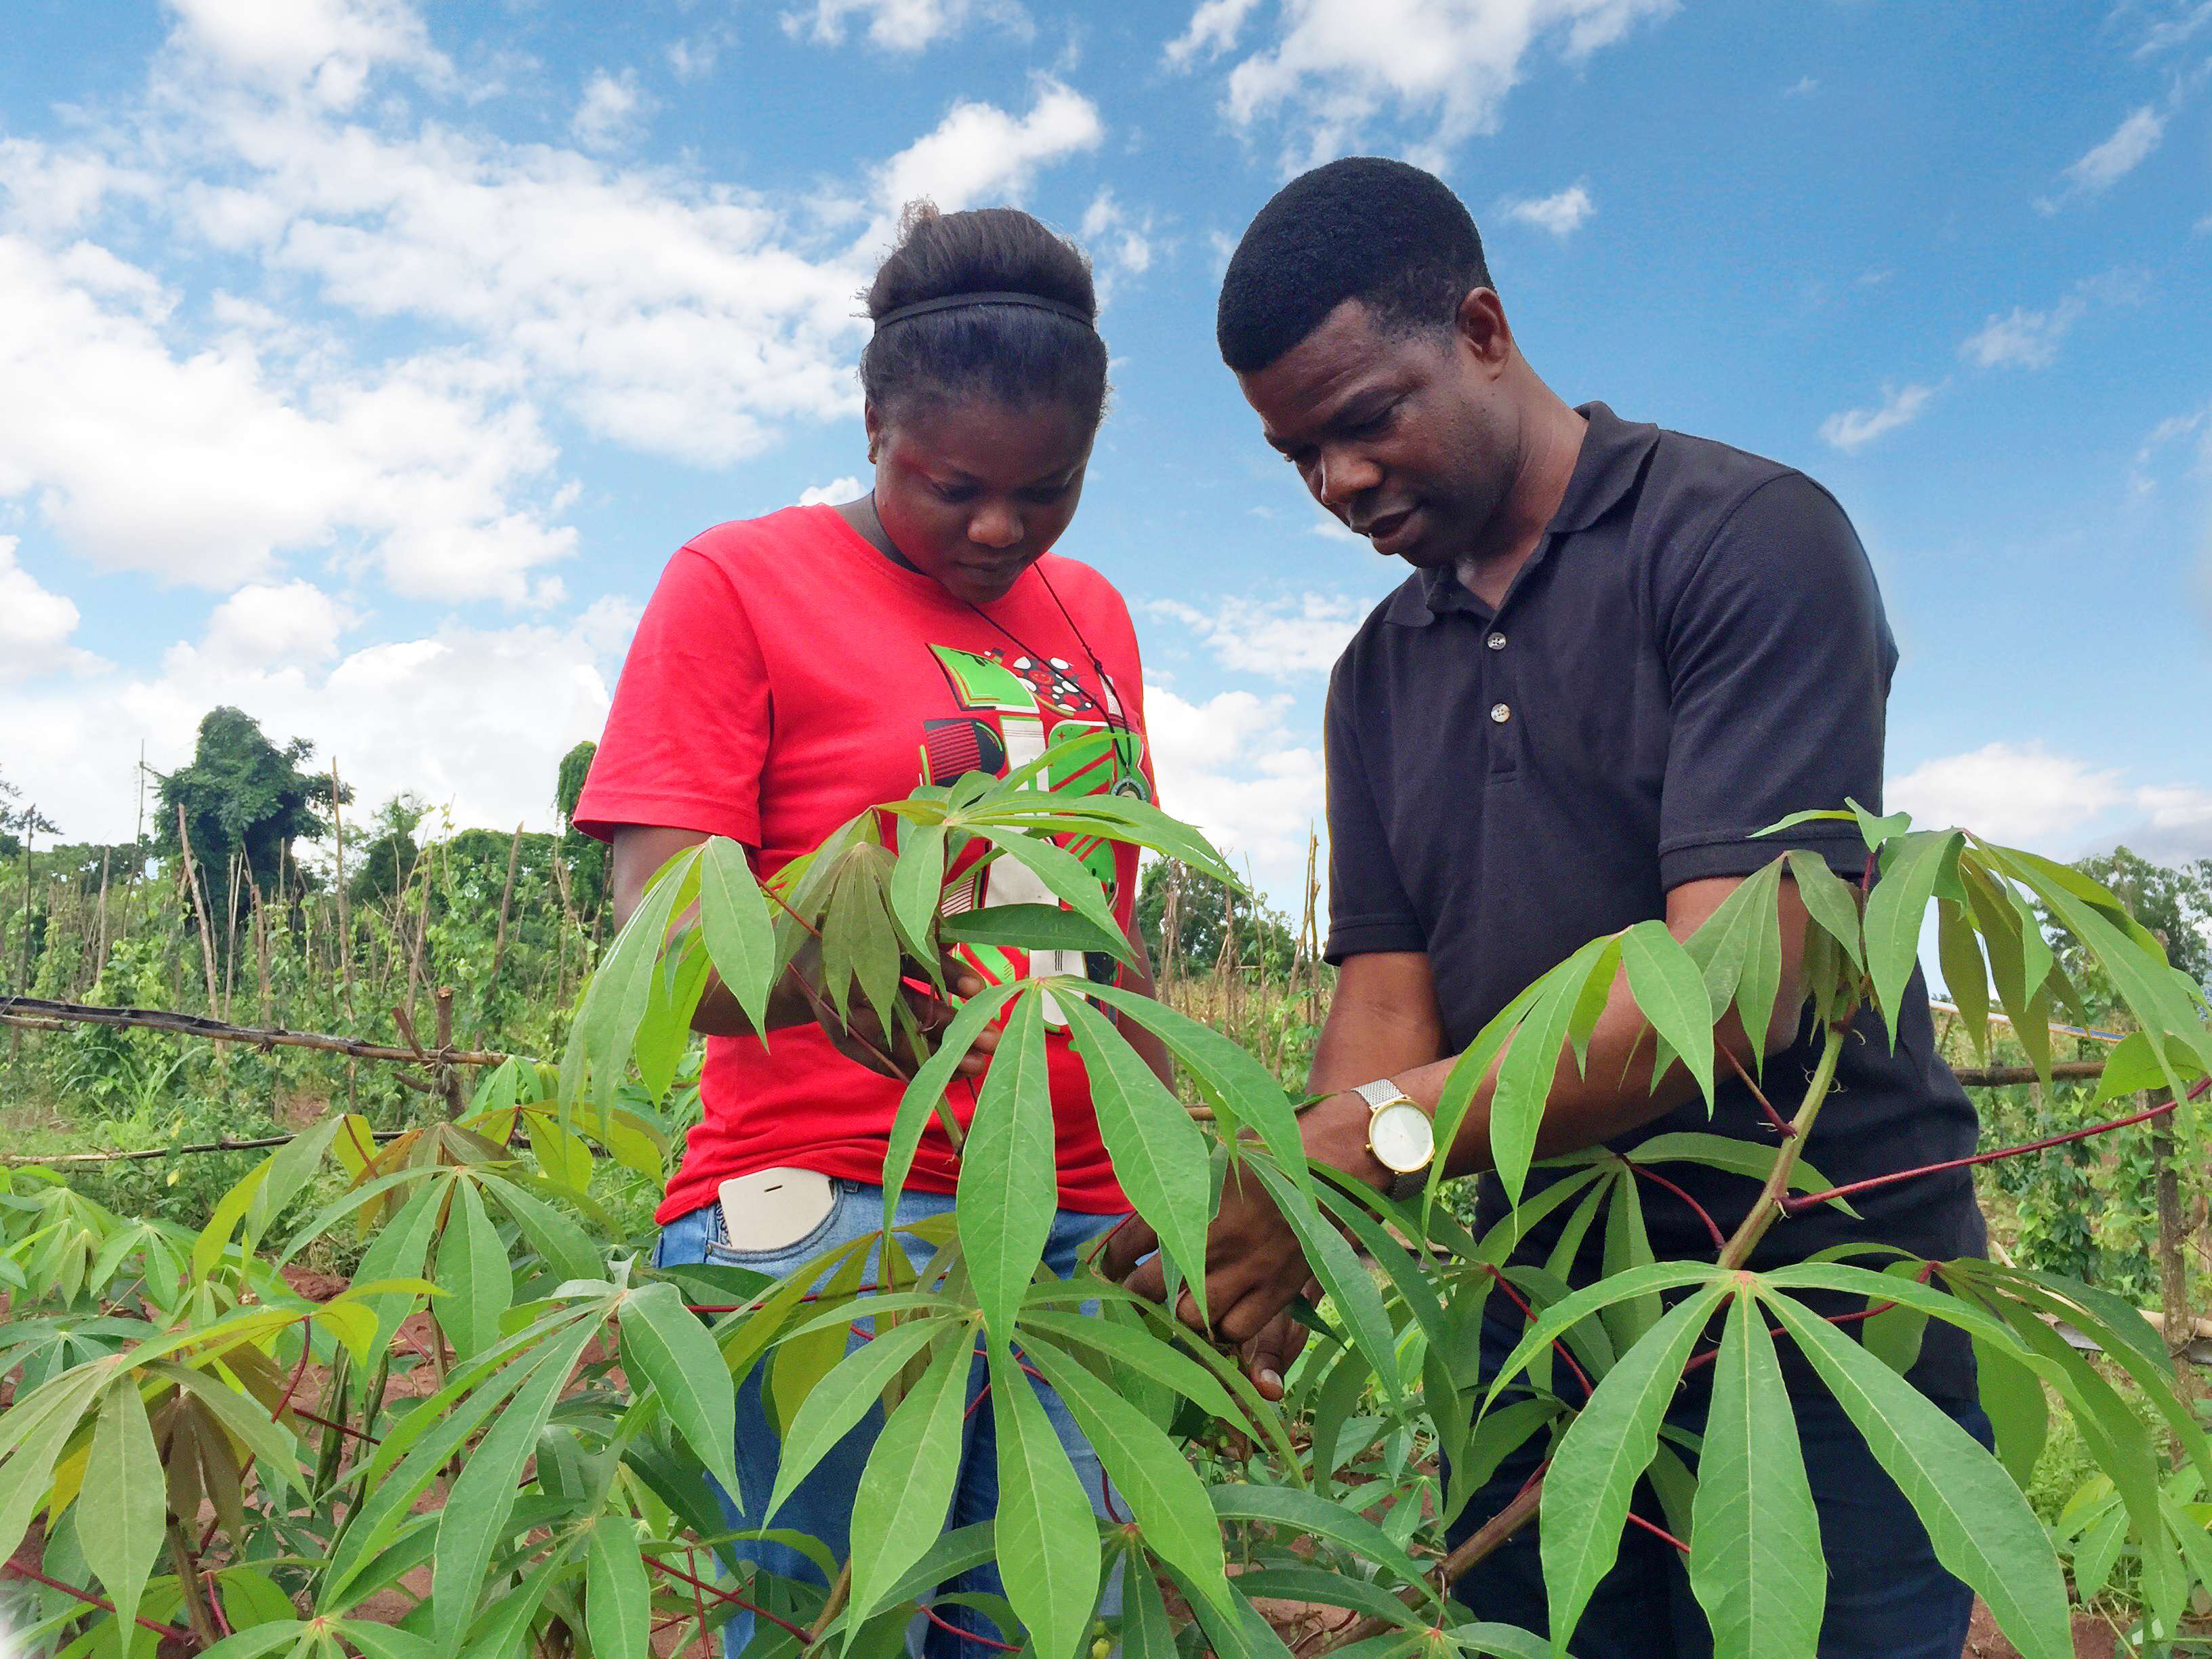 (l-r) Field technician Tessy Uwangue, and Chiedozie Egesi, project leader for the Next Generation Cassava Breeding project, check field plots of cassava at the International Institute of Tropical Agriculture in Nigeria for signs of disease. PHOTO PROVIDED